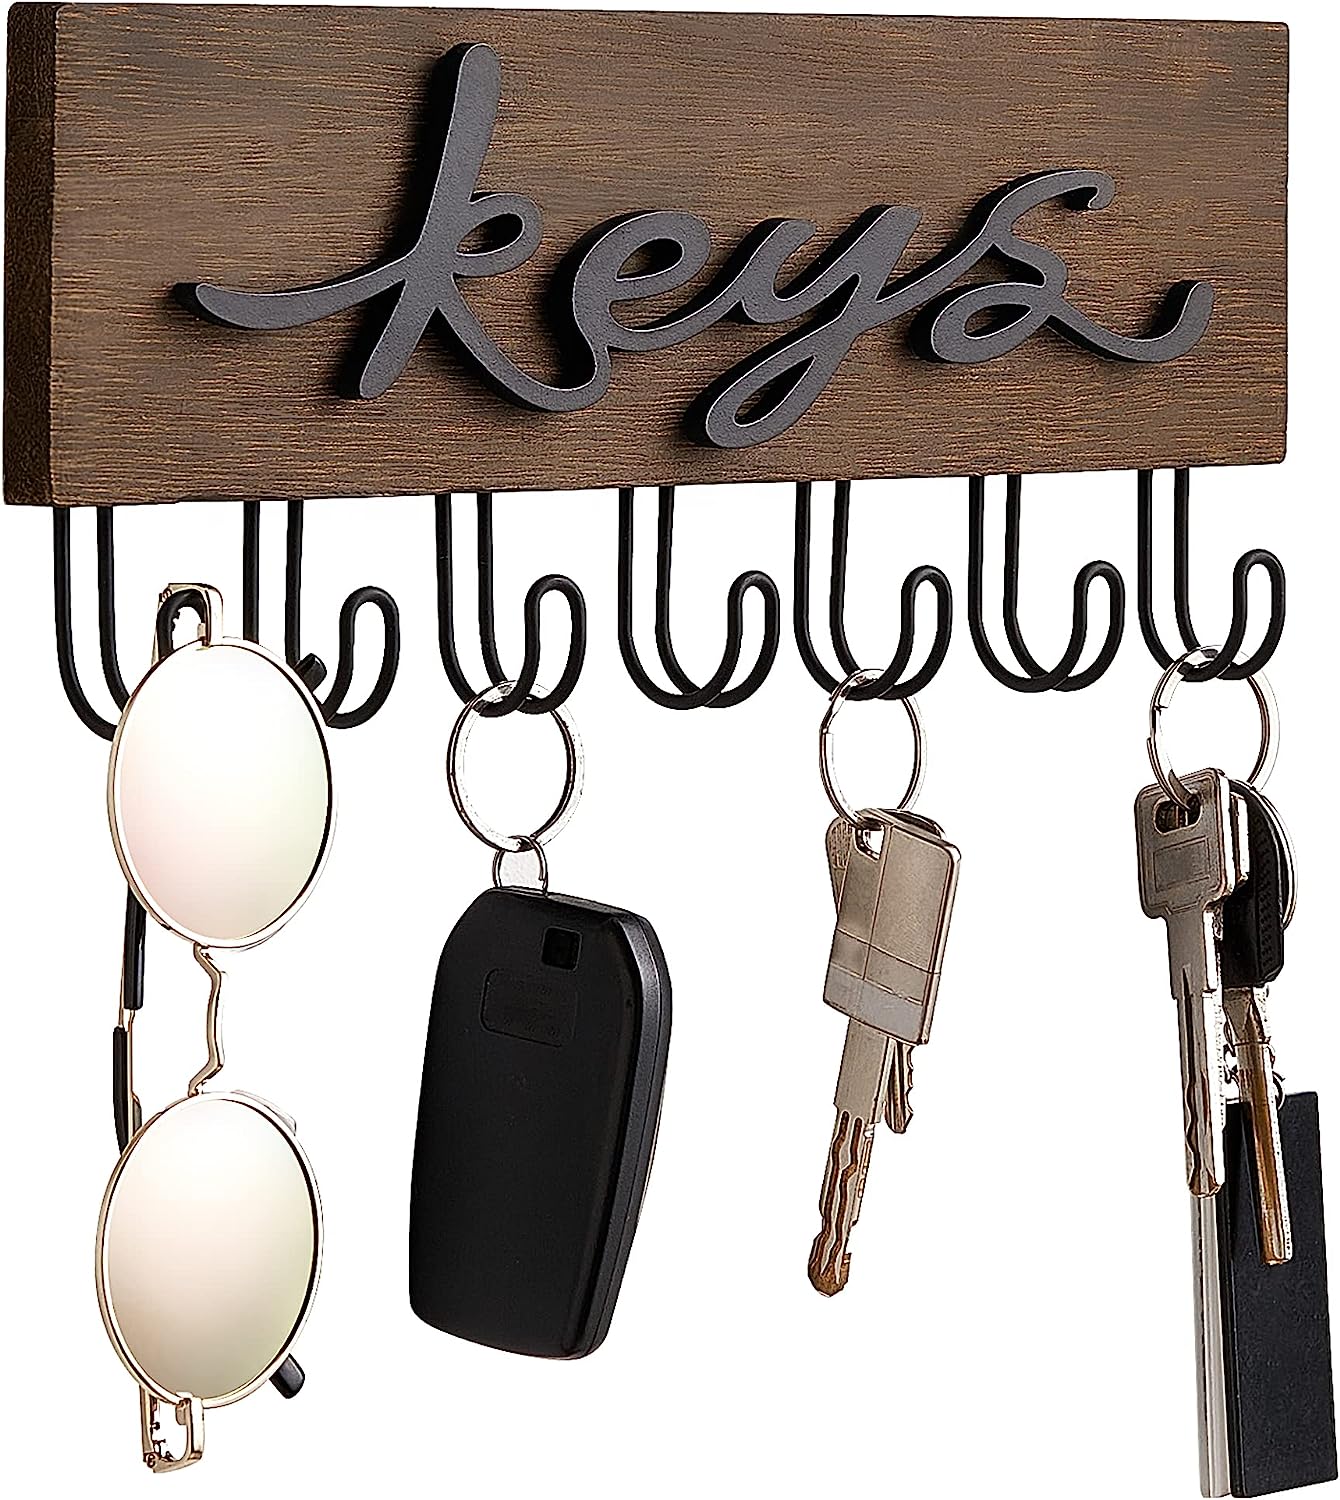 Key Holder for Wall Decorative with 7 Hooks, Wall Mounted Keys Hanger Organizer Rustic Wood Hanging Key Hooks Home Decor Farmhouse Key Rack for Entryway, Hallway, Office